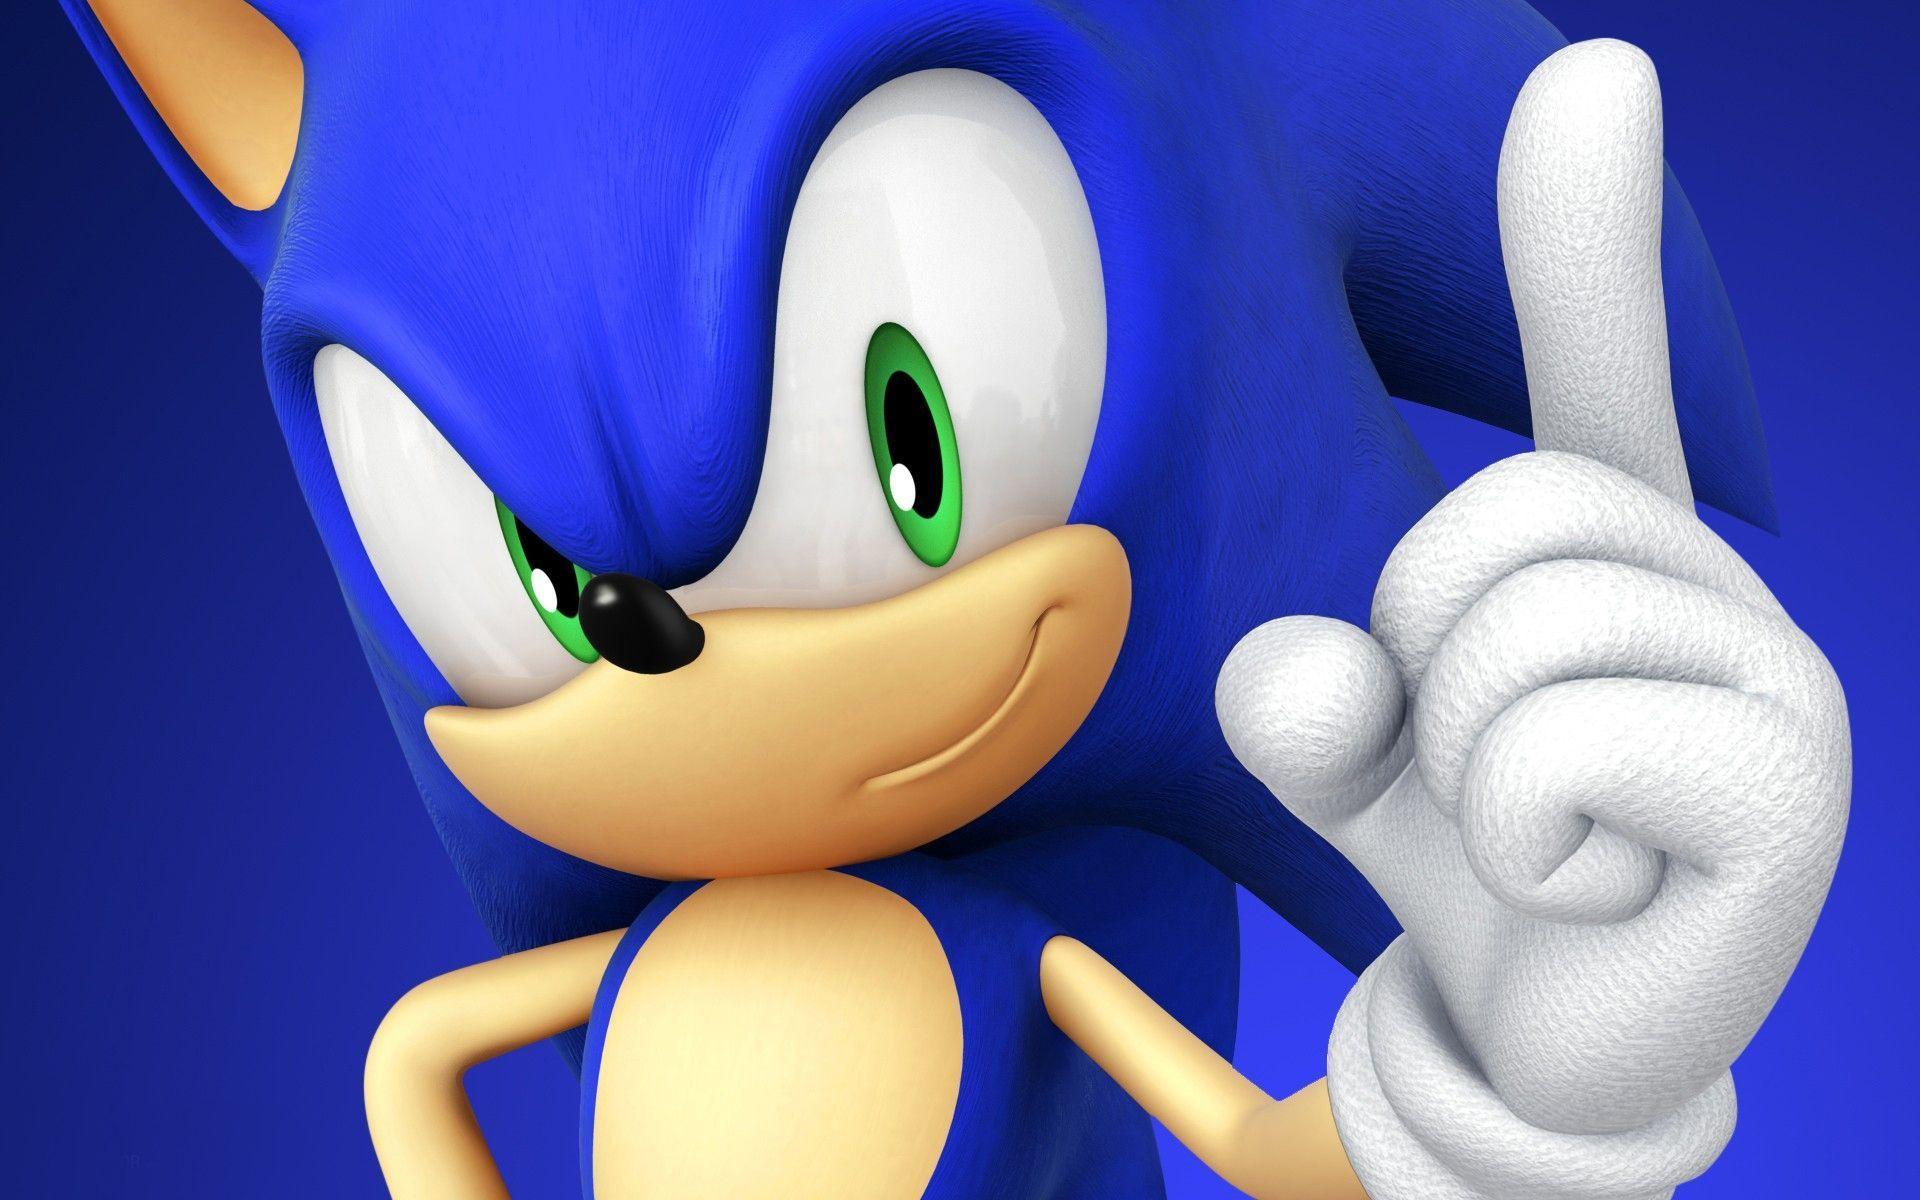 Free Sonic The Hedgehog Background Download. Wallpaper